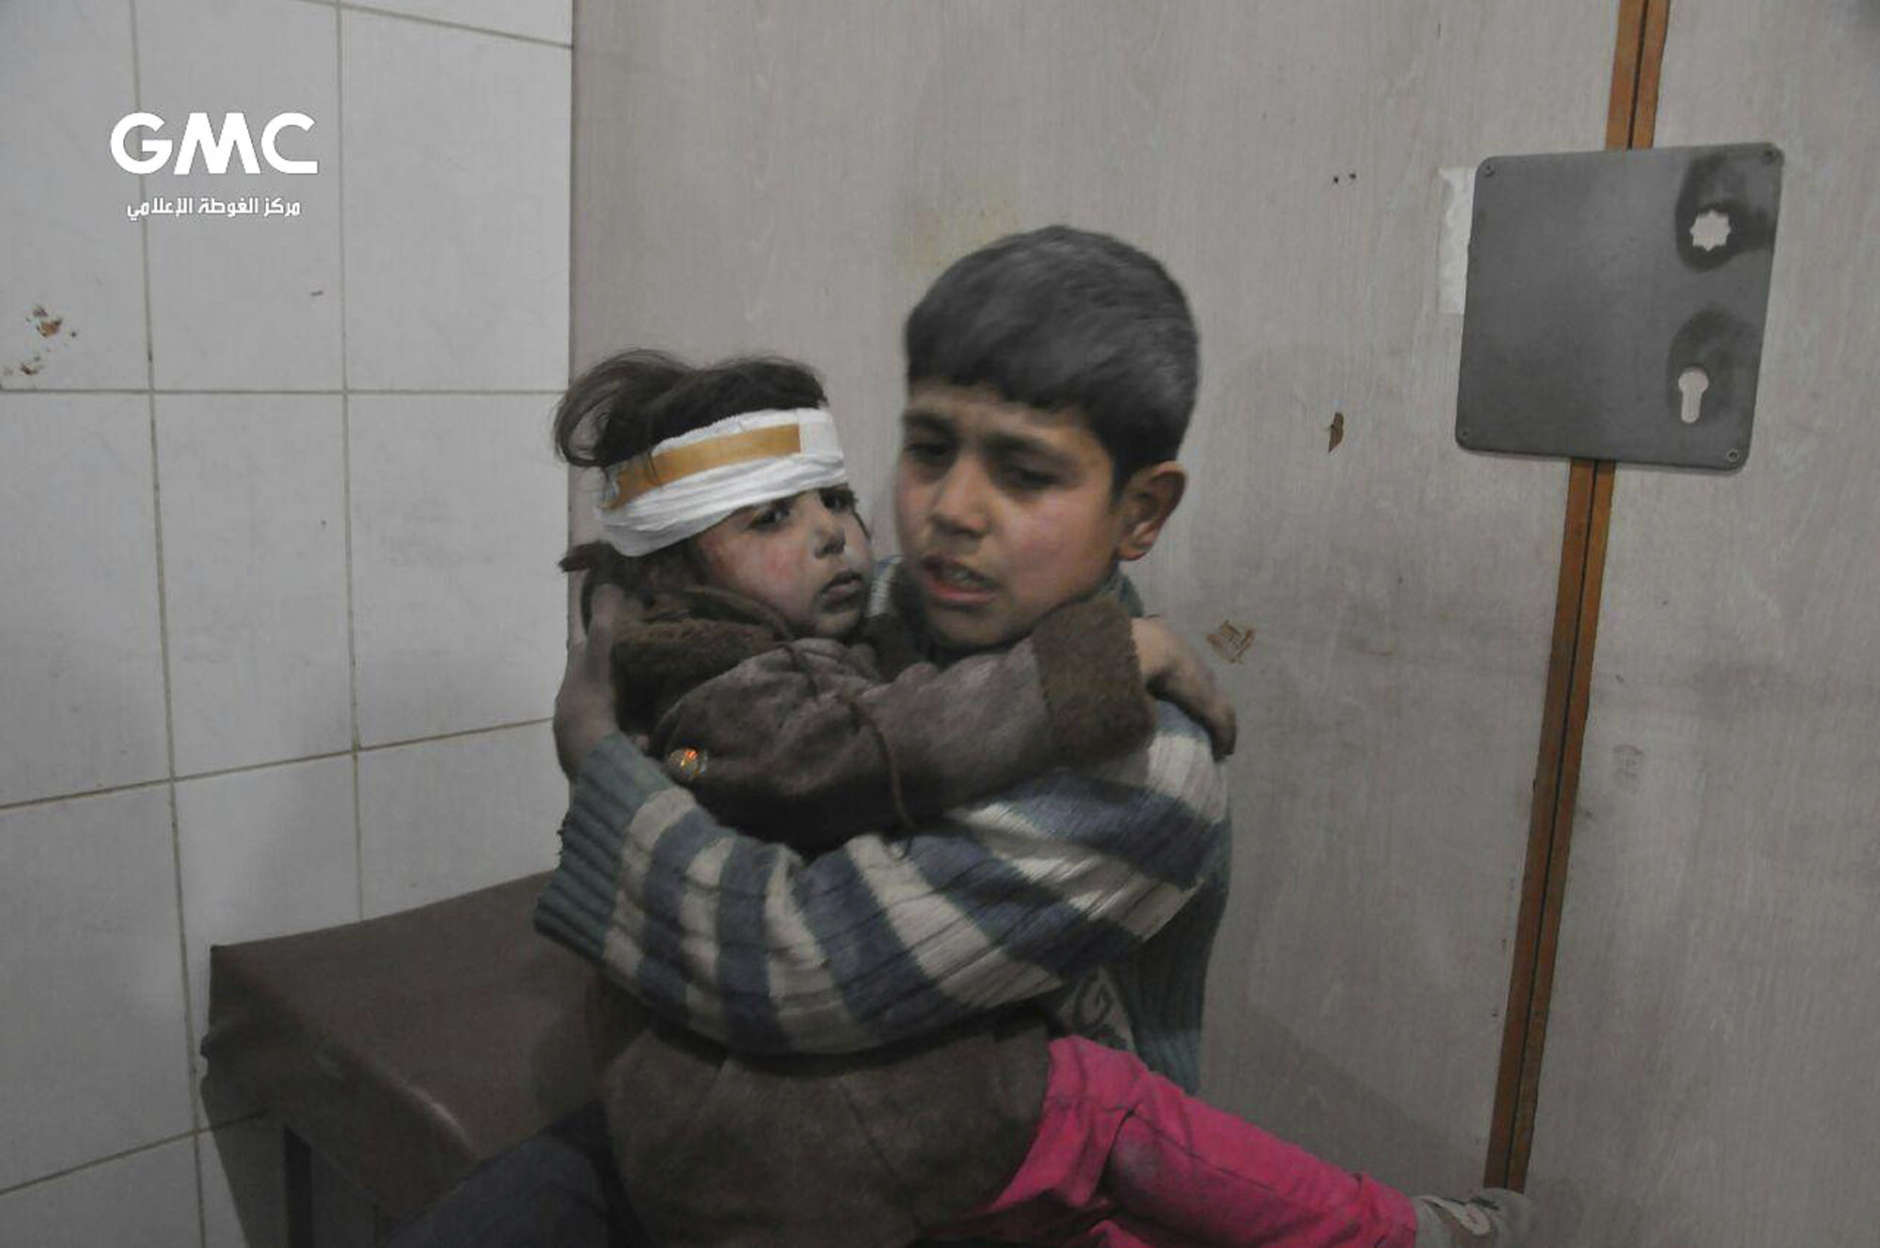 FILE - This file photo released Feb. 21, 2018 provided by the Syrian anti-government activist group Ghouta Media Center, shows two Syrian children who were wounded during airstrikes and shelling by Syrian government forces, at a makeshift hospital, in Ghouta, a suburb of Damascus, Syria. After seven years of war in Syria, the United Nations has one thing to say: Stop the war on children. Of Syria’s estimated 10 million children, 8.6 million are now in dire need of assistance. While the U.N. has verified about 2,500 children killed between 2014 and 2017, it says the actual numbers are much higher. (Ghouta Media Center via AP, File)